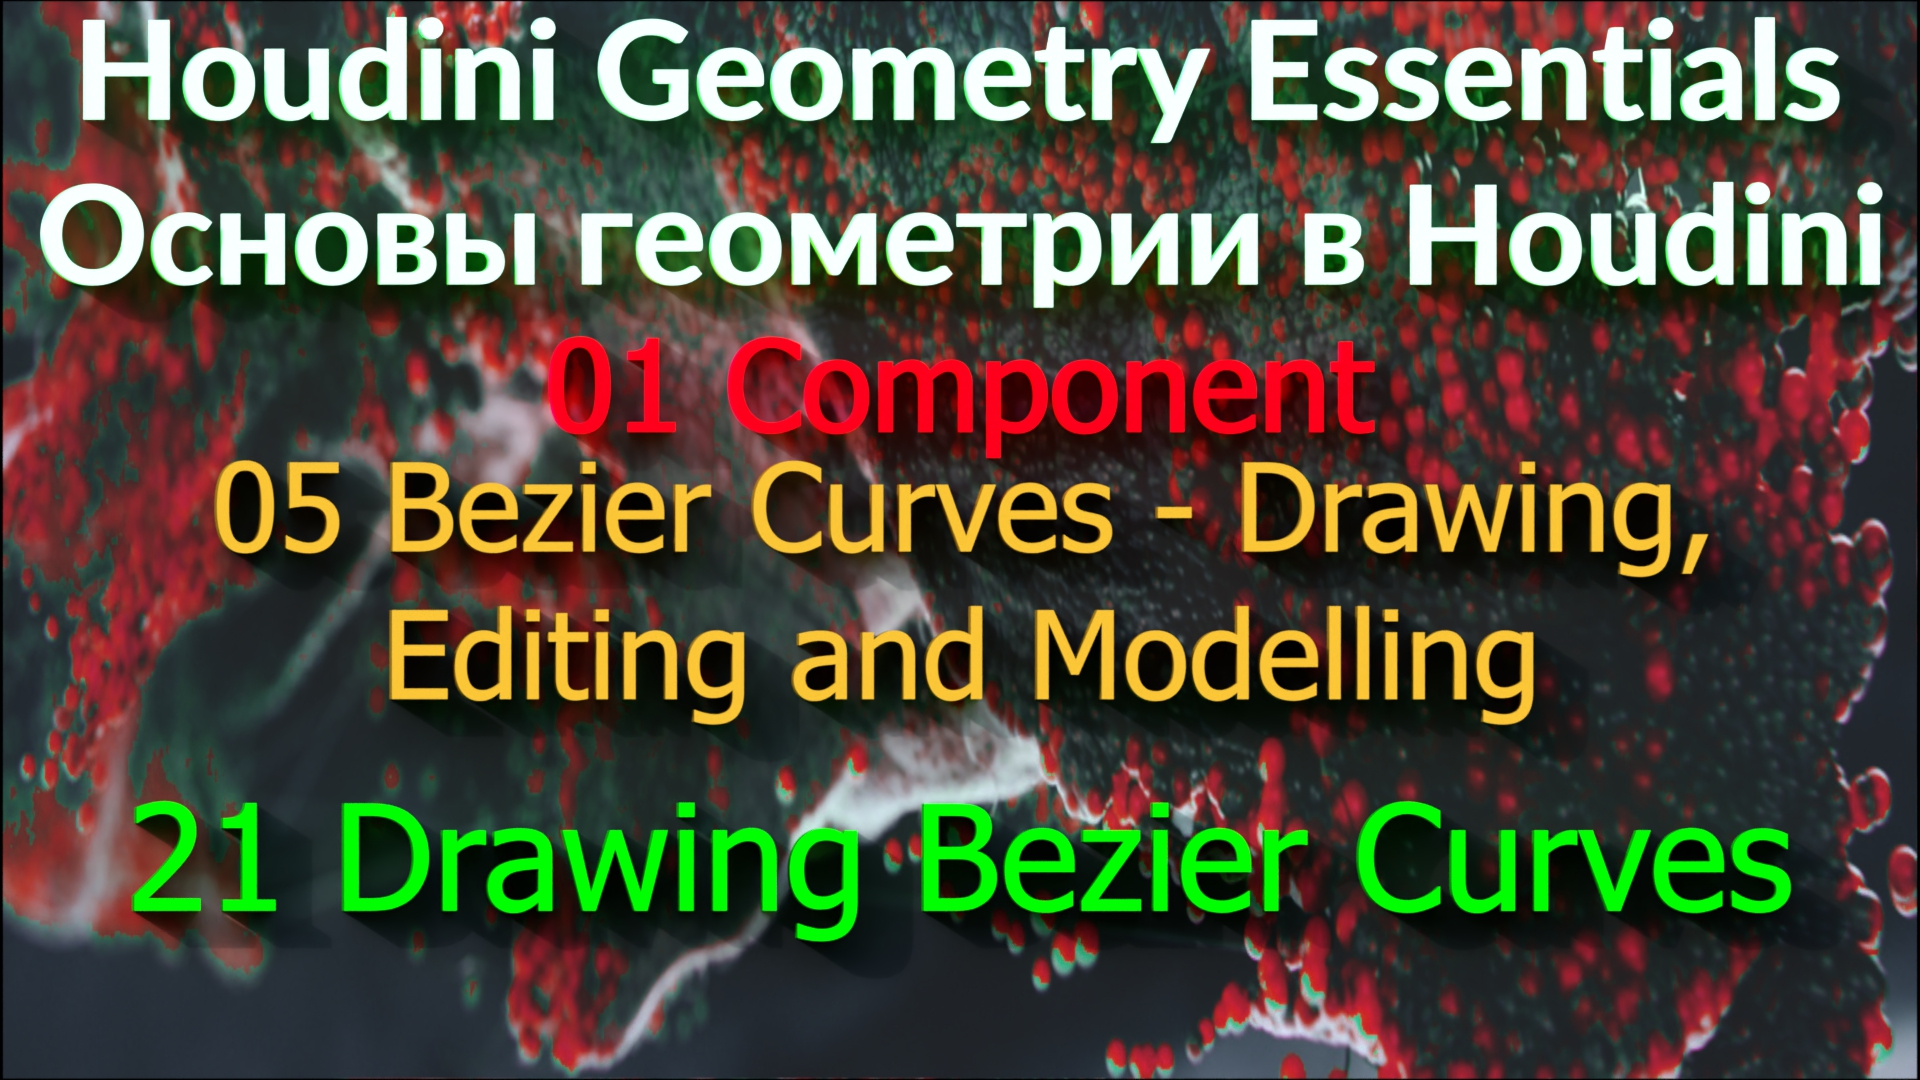 01_05_21. Drawing Bezier Curves